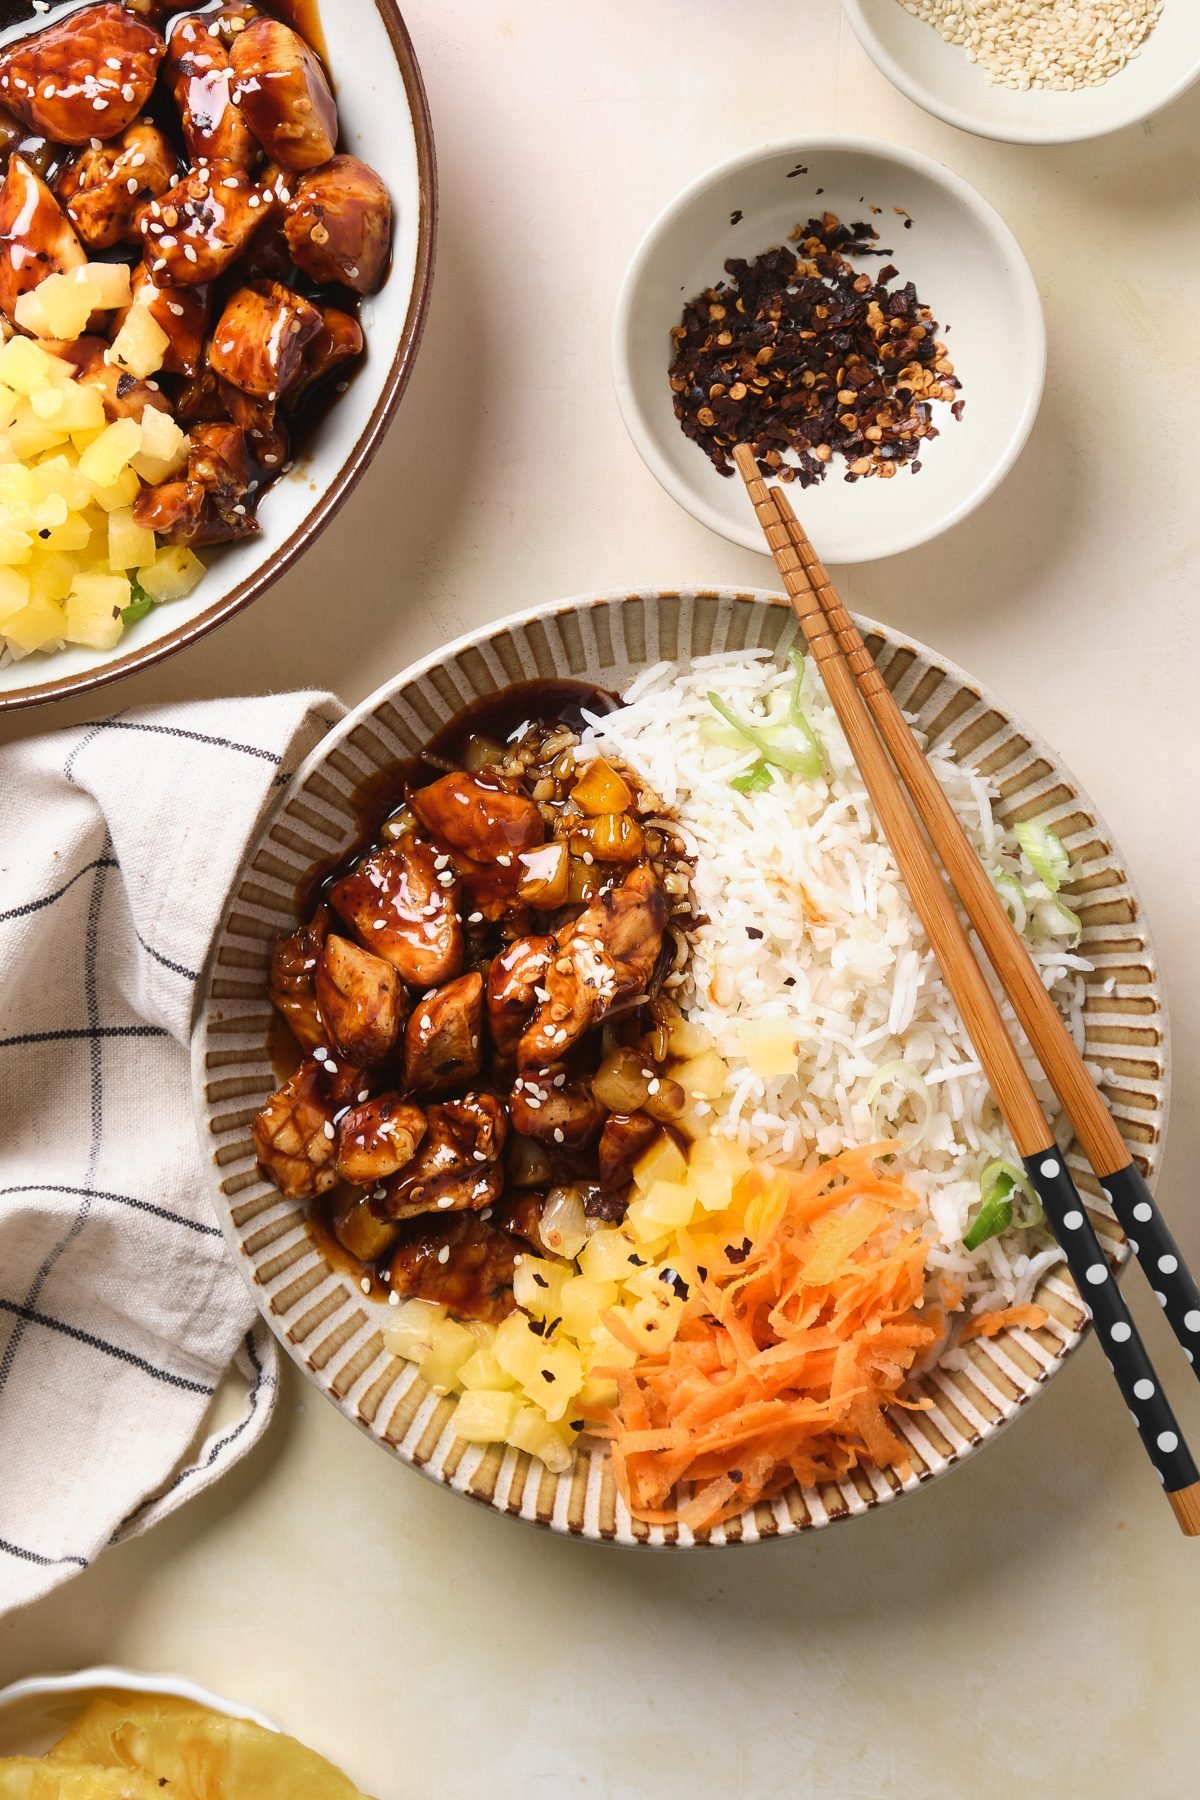 Chopsticks on a bowl with chicken teriyaki, pineapple, carrots, and rice blend.